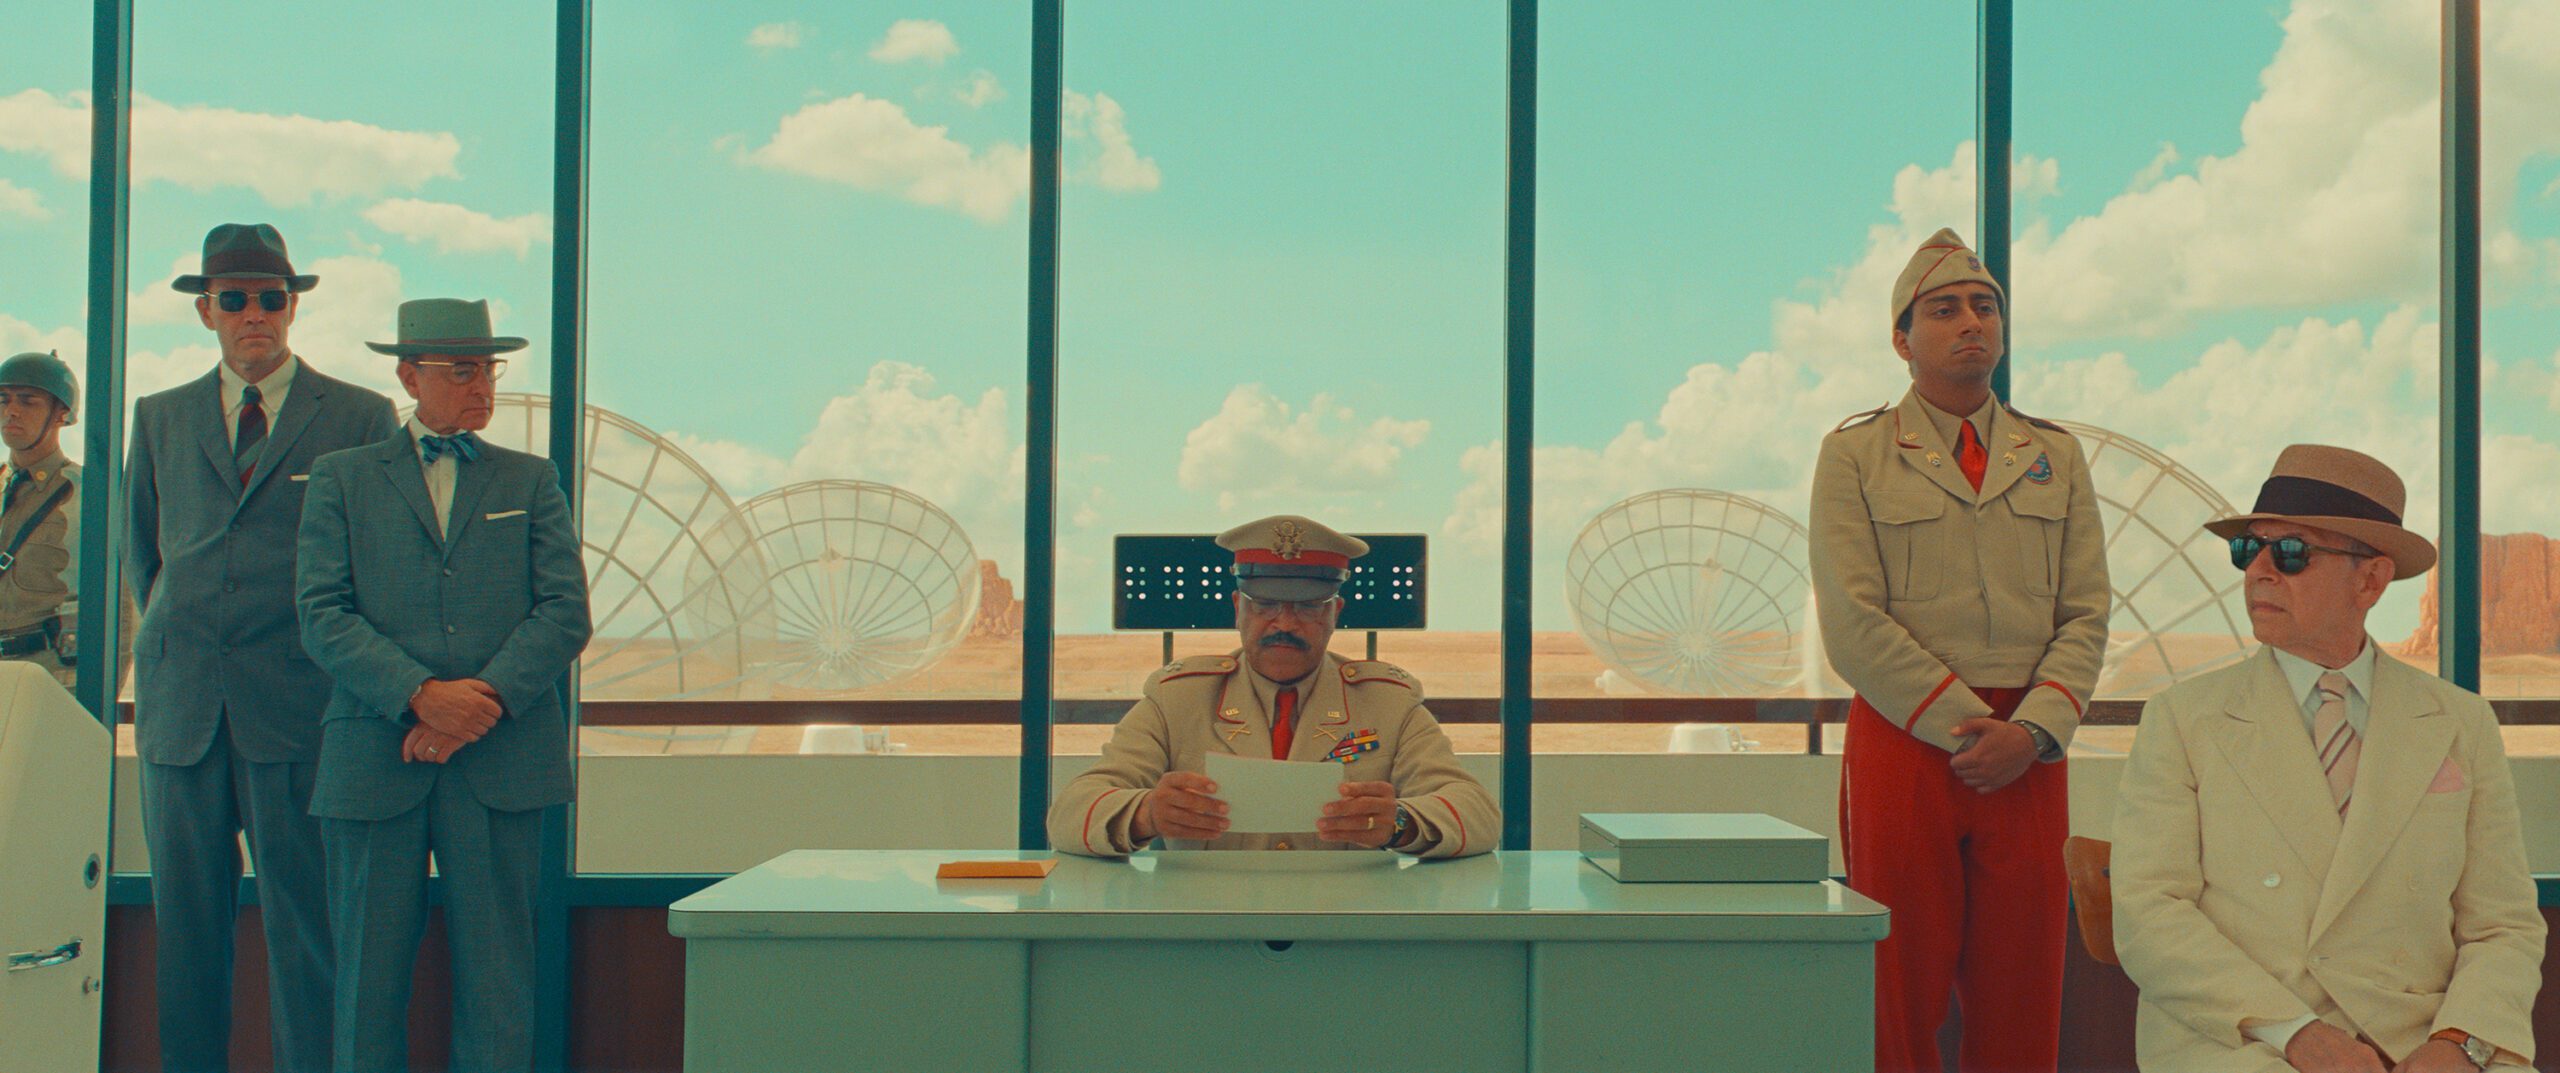 Wes Anderson's Style On and Off the Big Screen